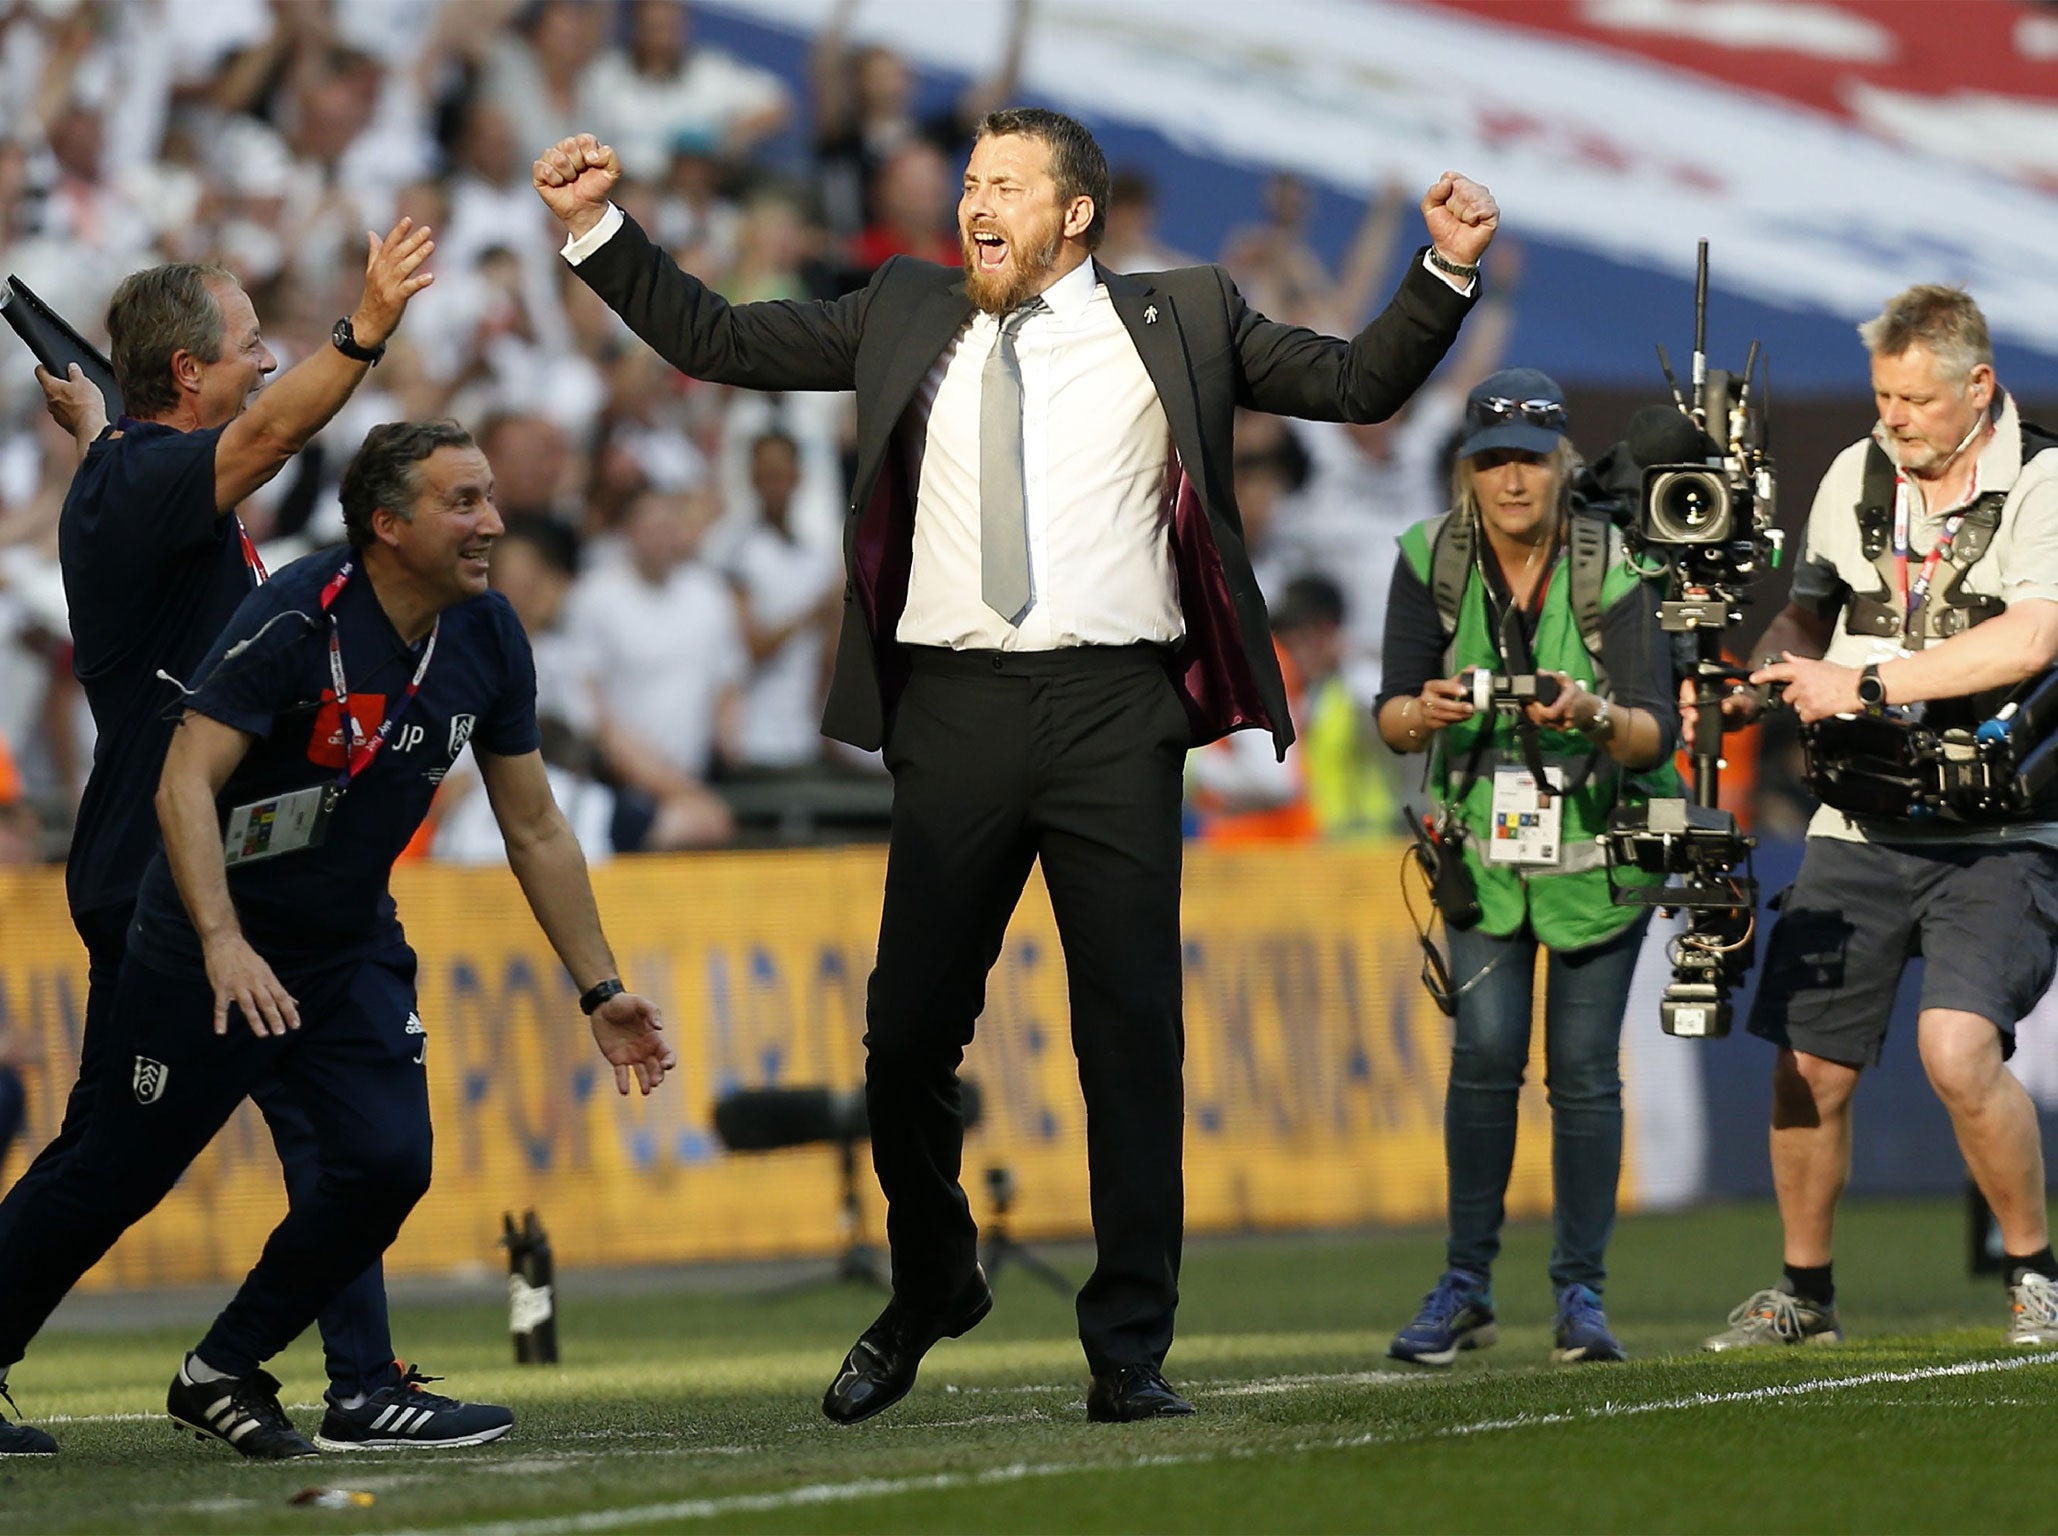 Jokanovic has Fulham back in the big time